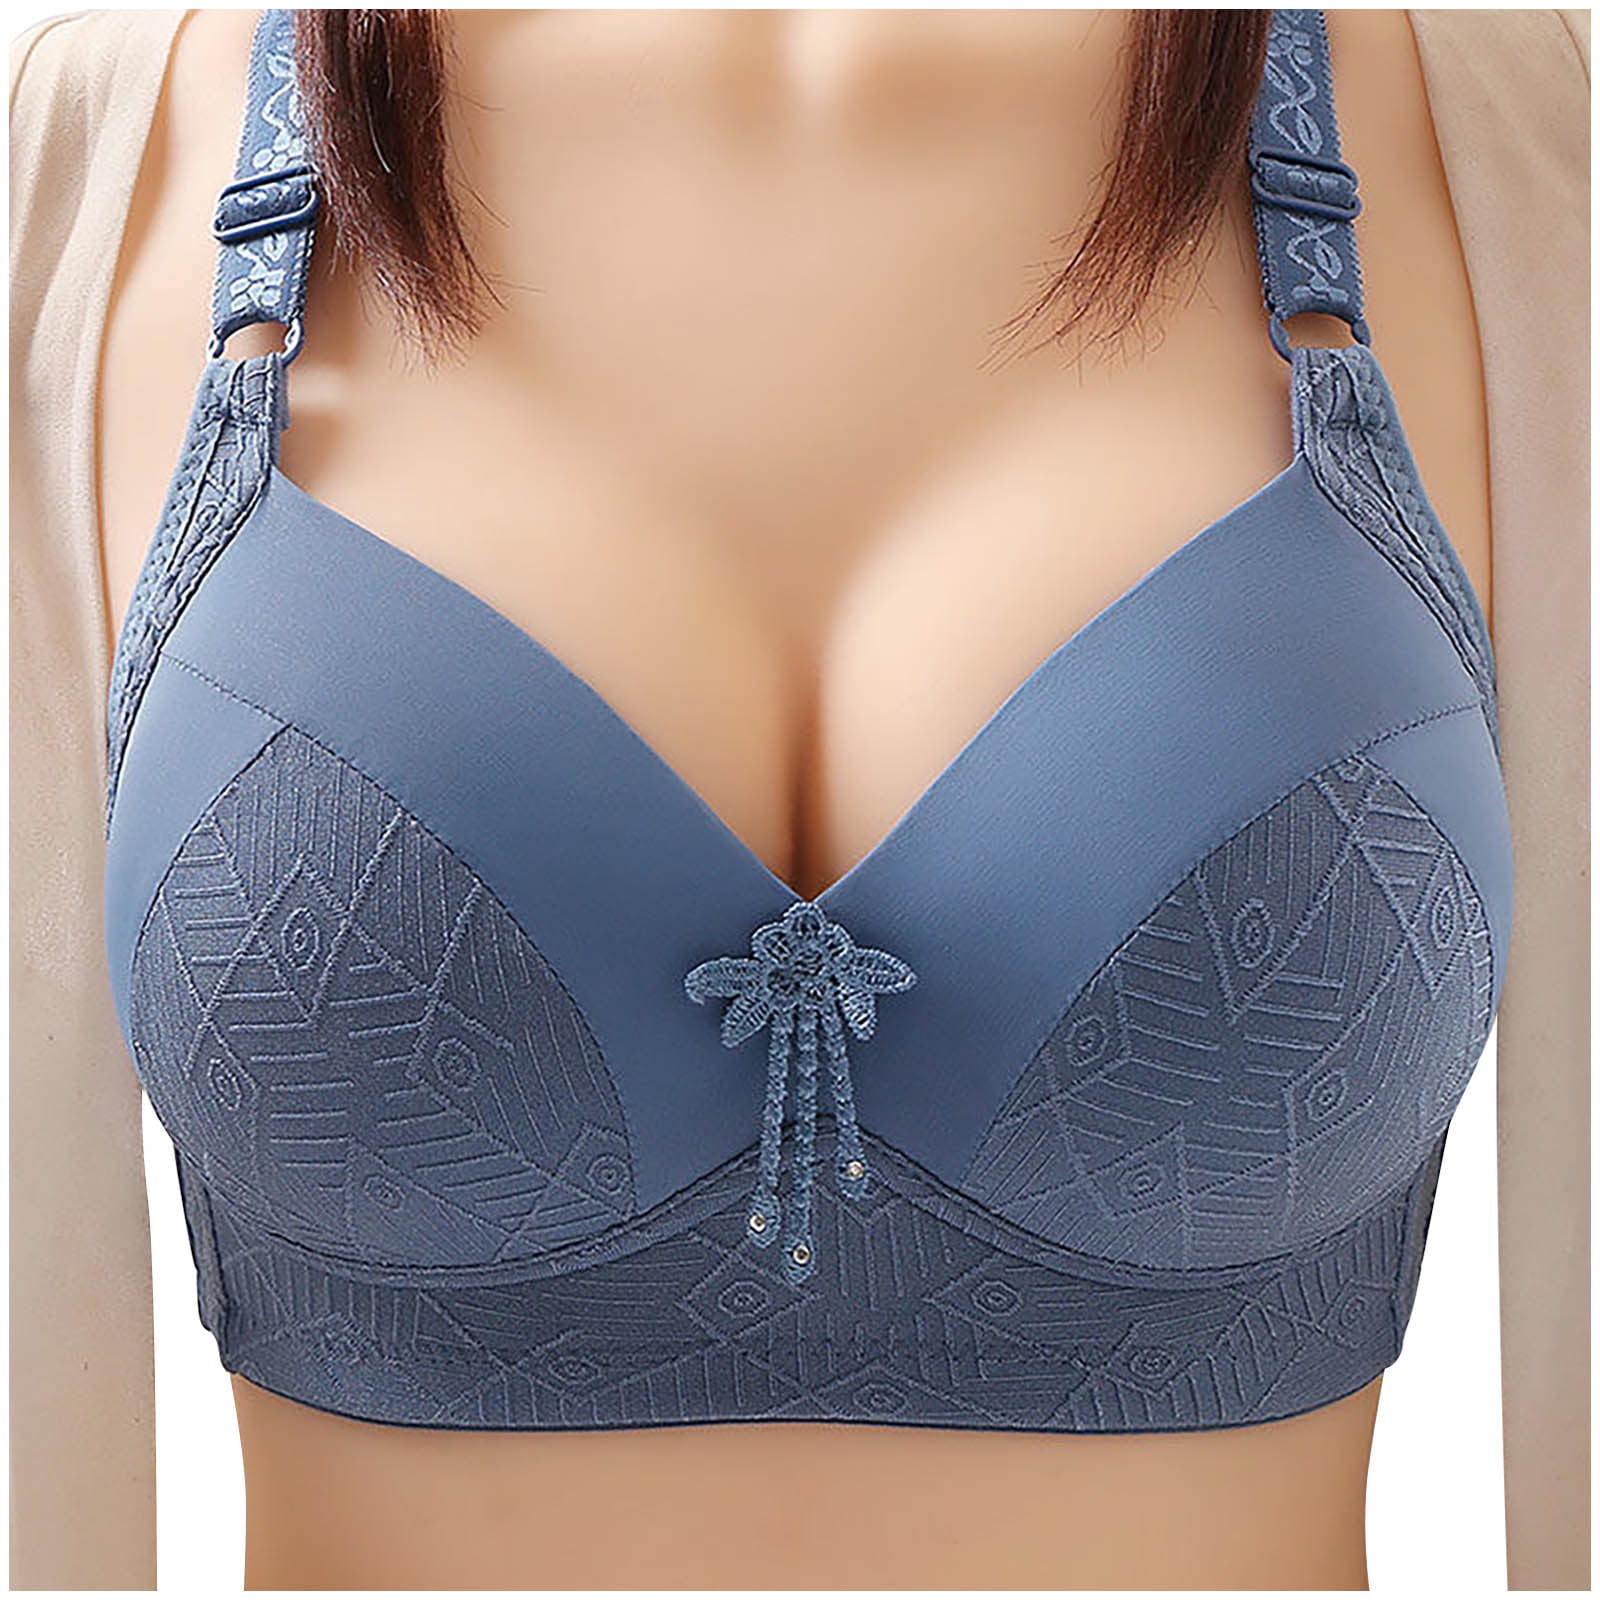 Mrat Clearance Tshirt Bras for Women Lace Solid Underwear Seamless Bra  Cotton Bralettes Seamless Bralette for Female Pack Pajamas Embroidered  Ladies